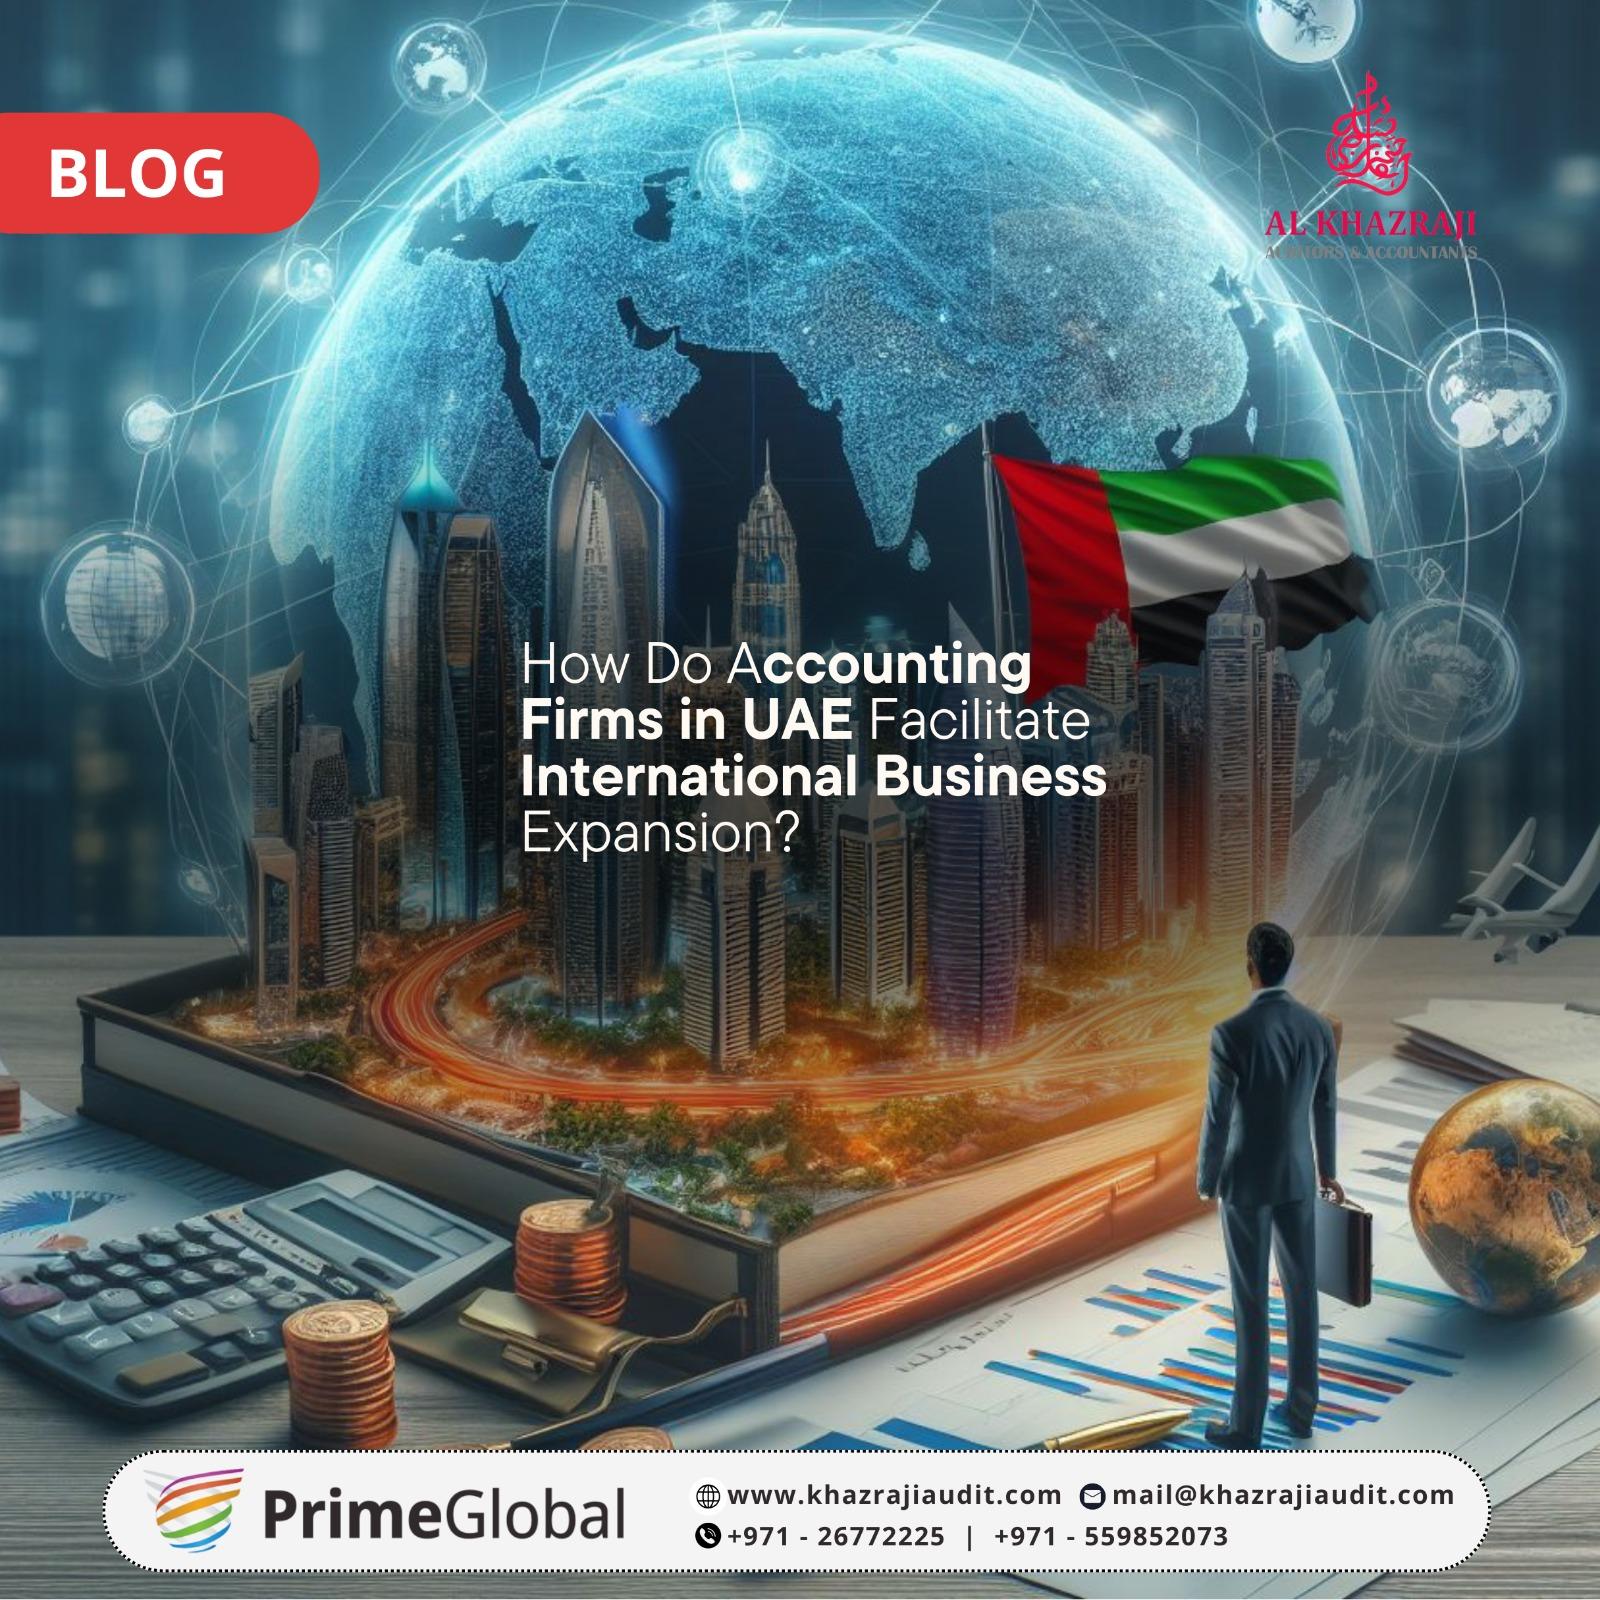 Maximizing International Business Expansion with Accounting Firms in Abu Dhabi